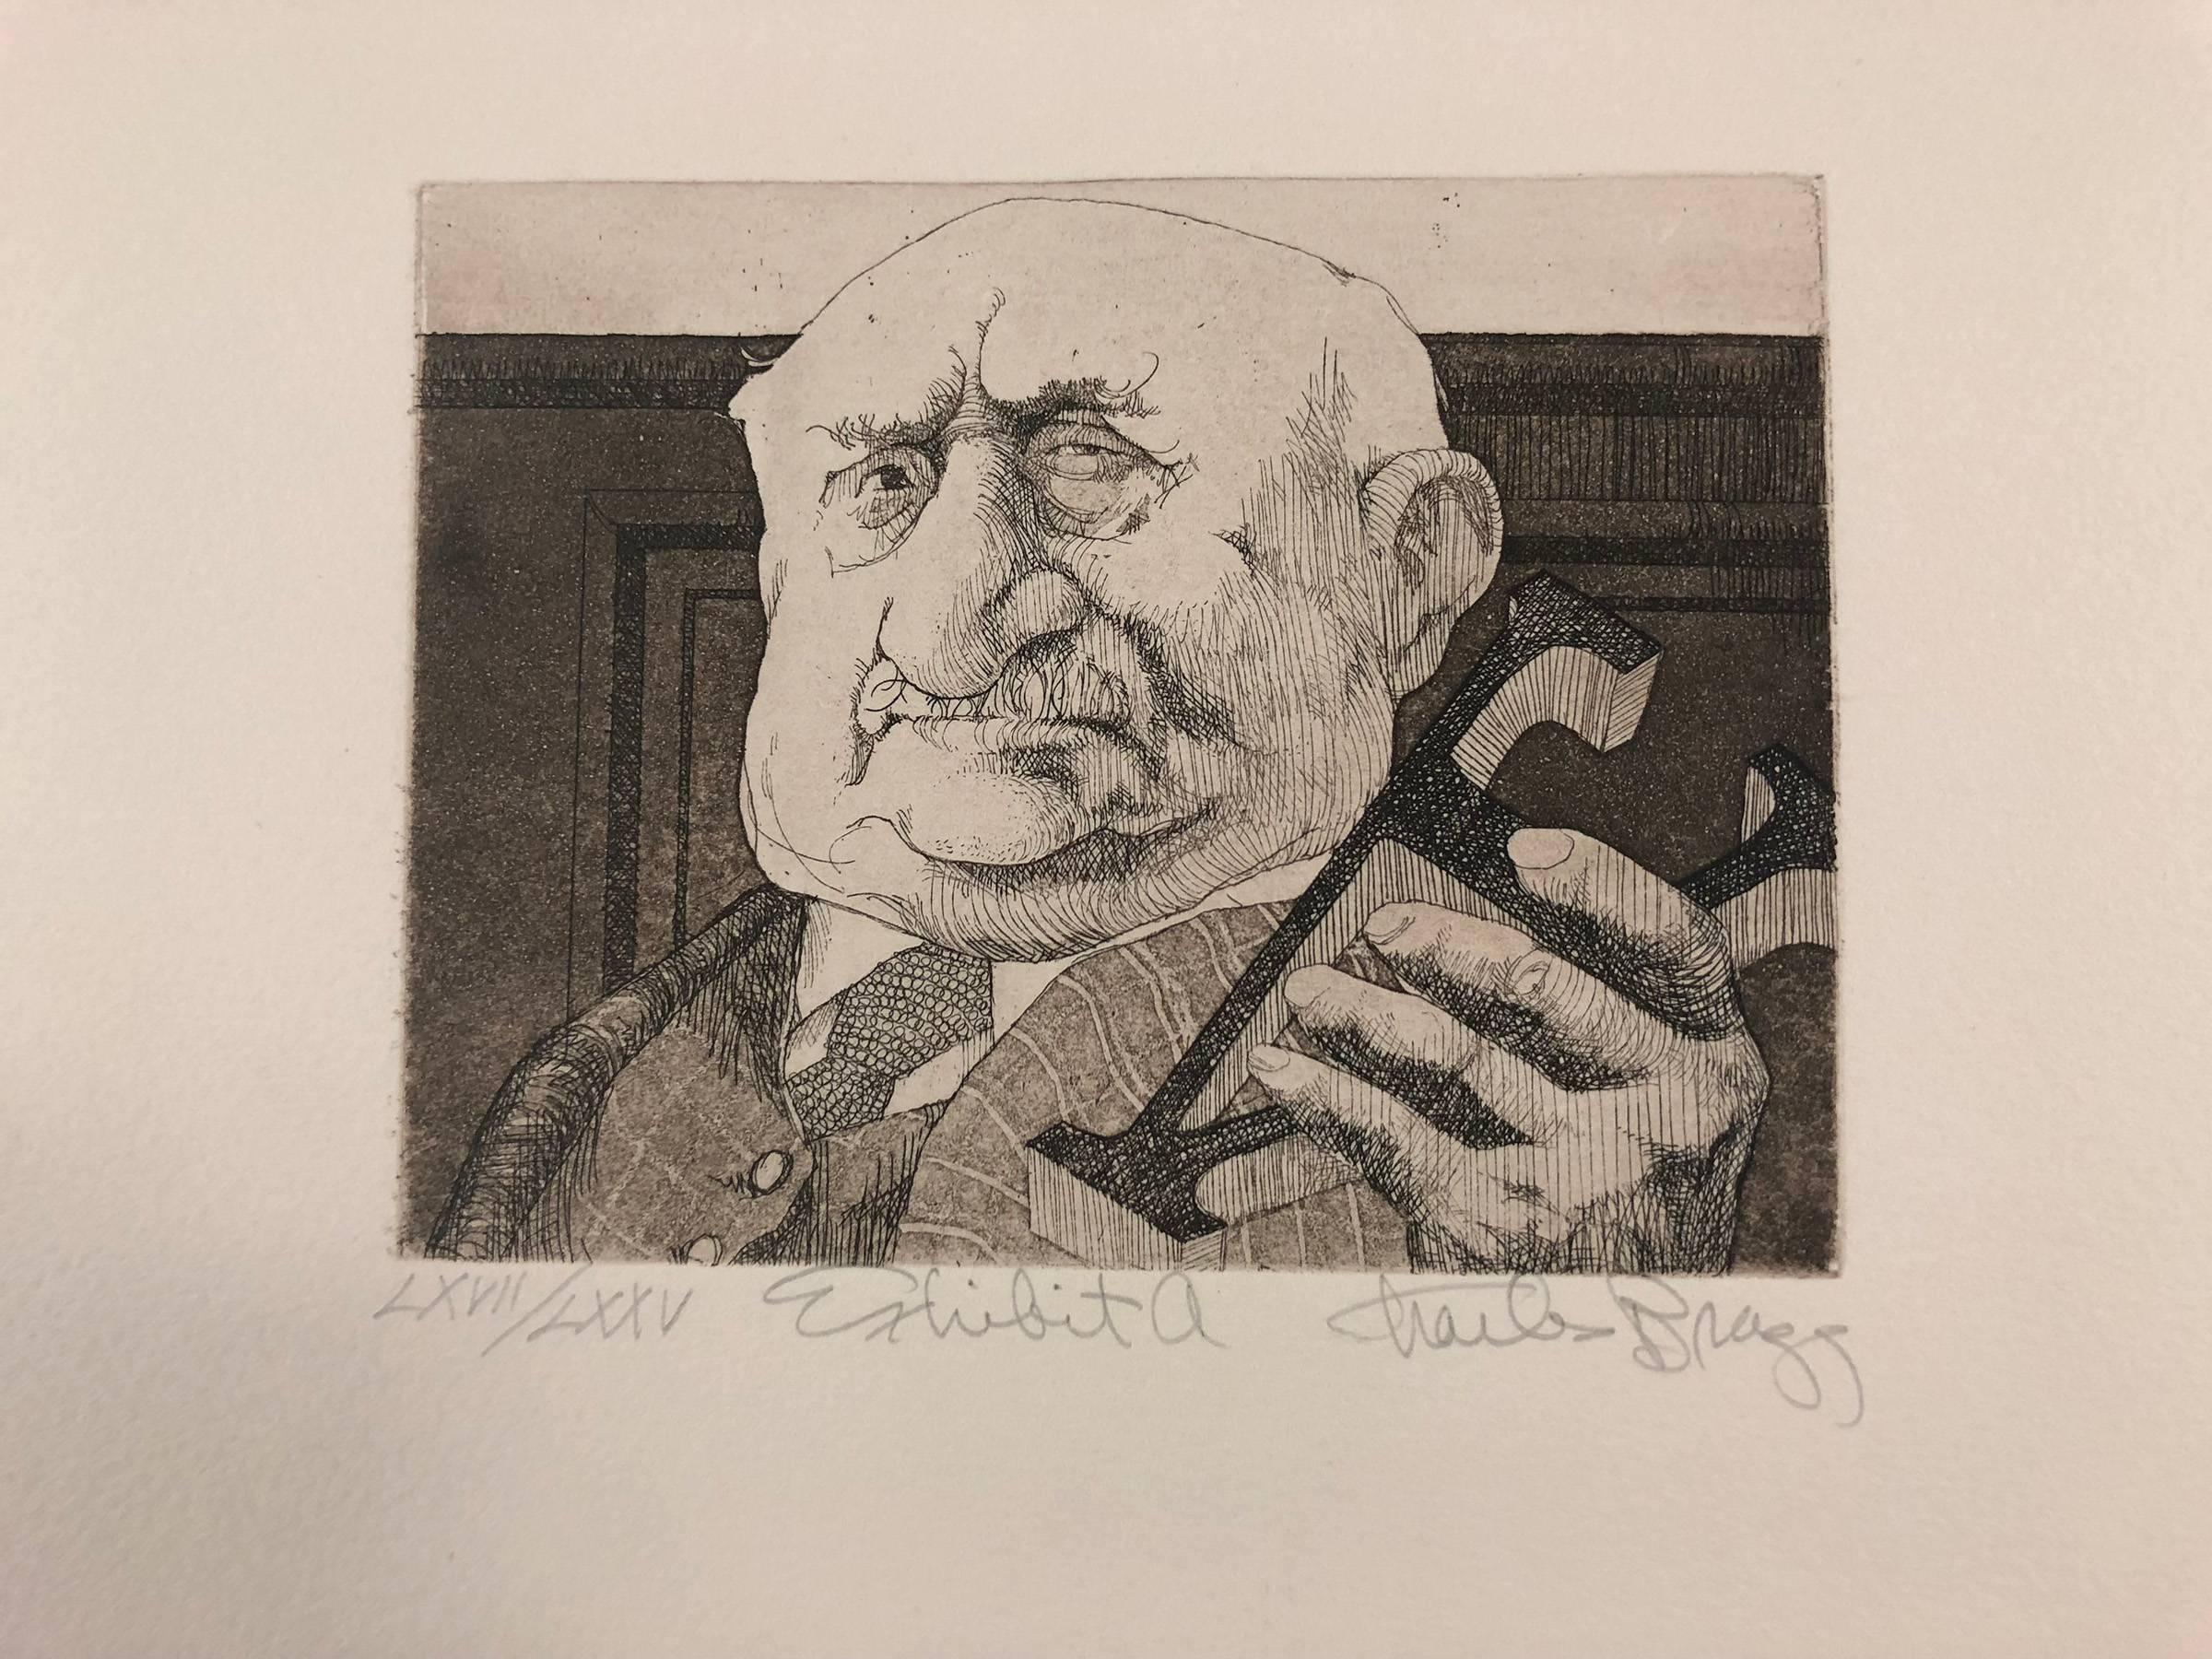 This is a great original portfolio suite of 7 signed and numbered (small edition of 75) etchings by the great American artist Charles Bragg.  Perfect for an attorney!

Painter, sculptor, and illustrator of commentary on human behavior, Charles Bragg